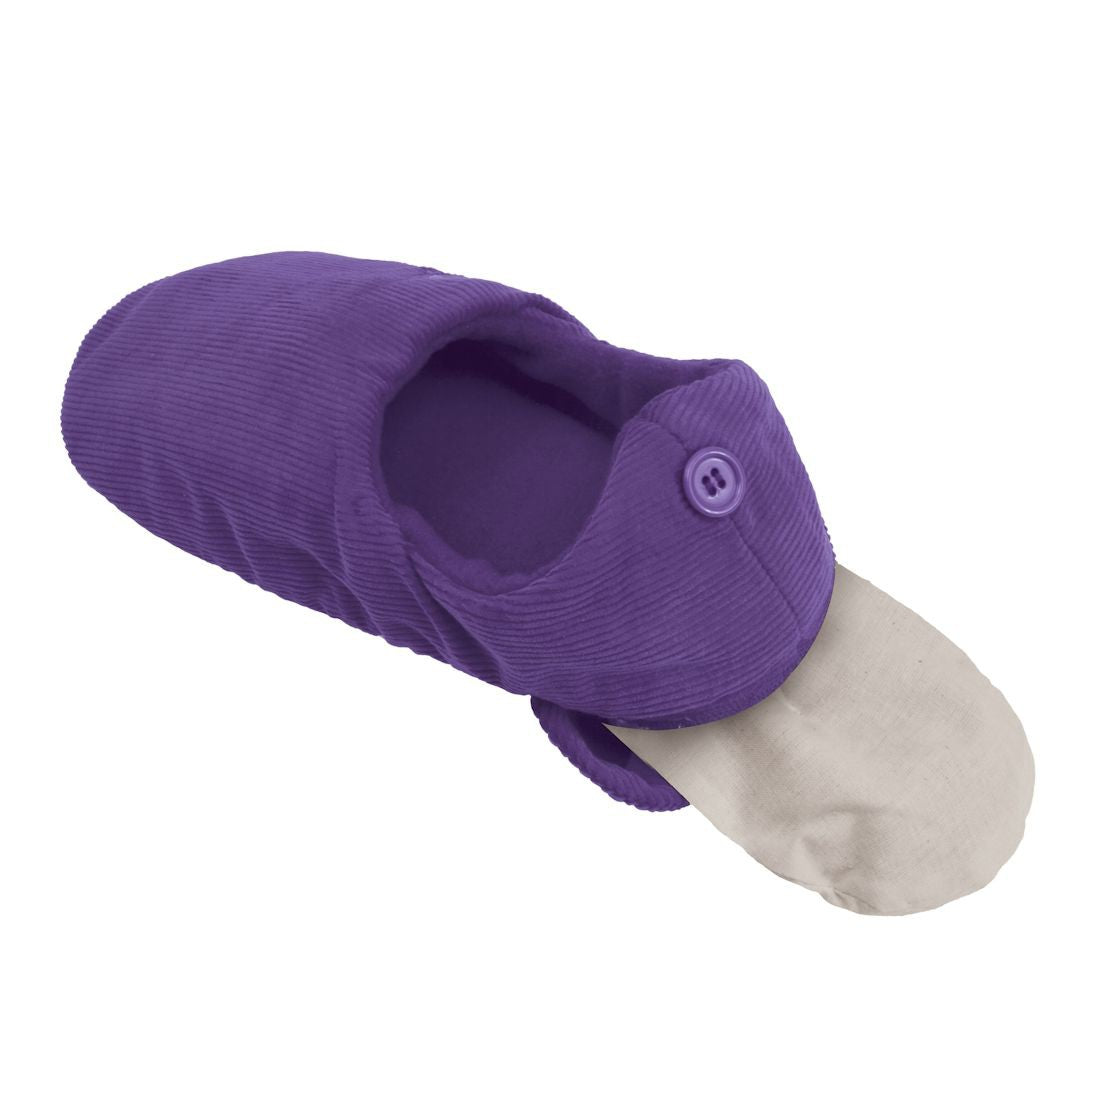 Aroma Home Microwavable Feet Warmers - Lavender